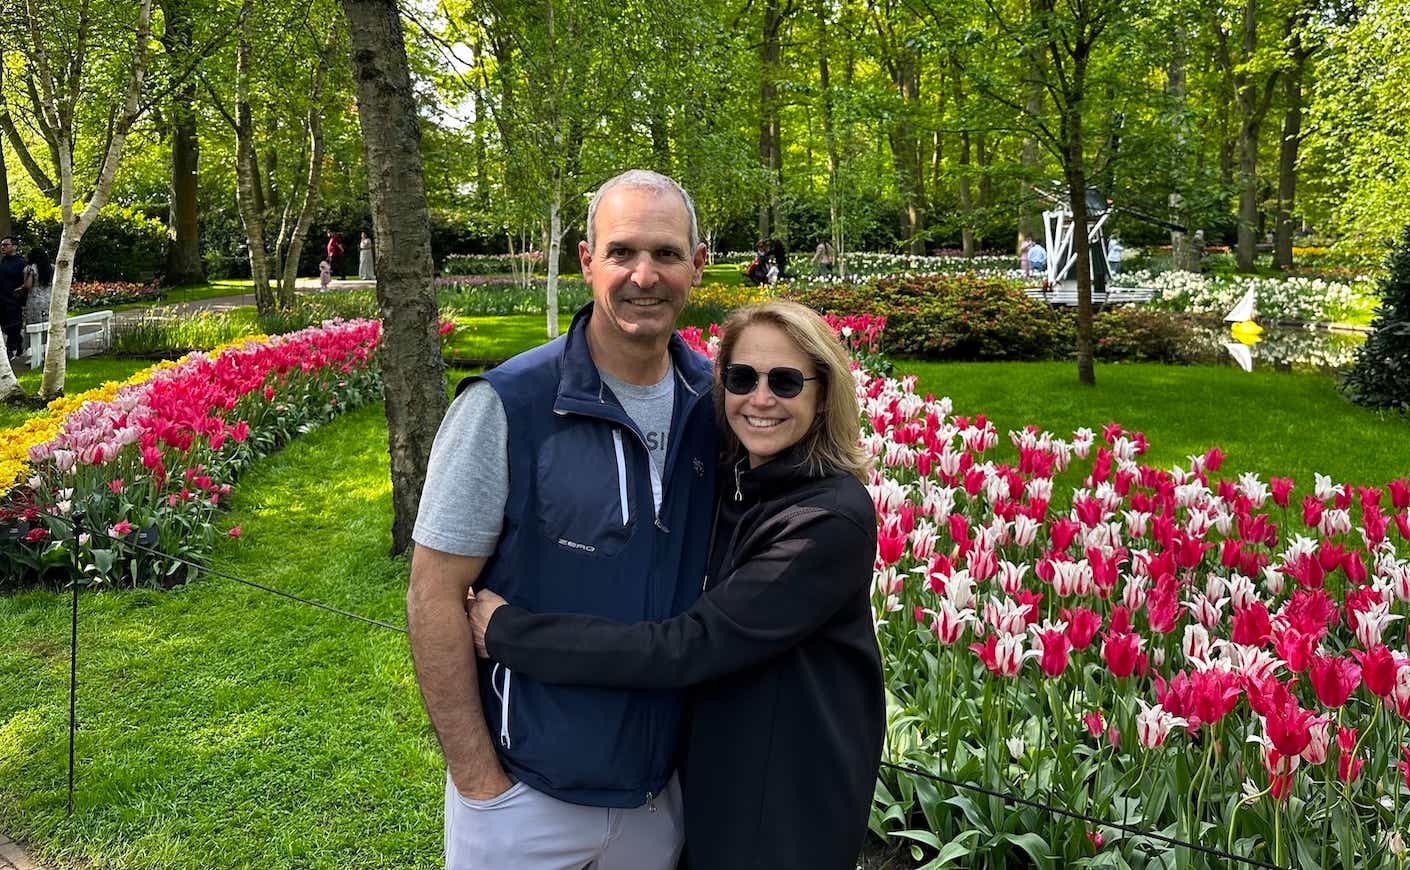 Katie and John in front of tulips in Amsterdam